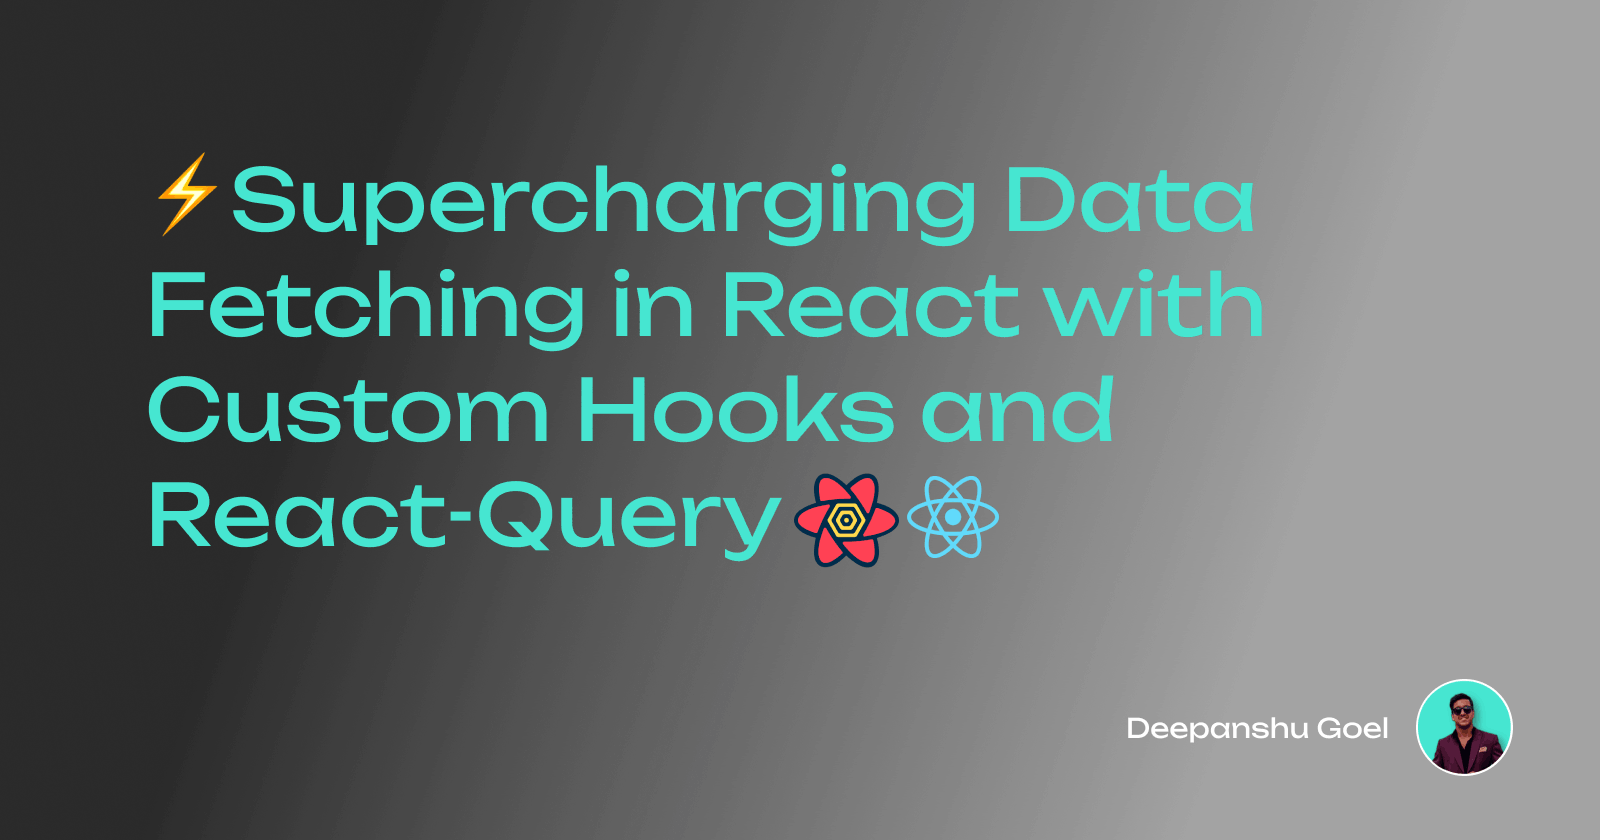 Supercharging Data Fetching in React with Custom Hooks and React-Query